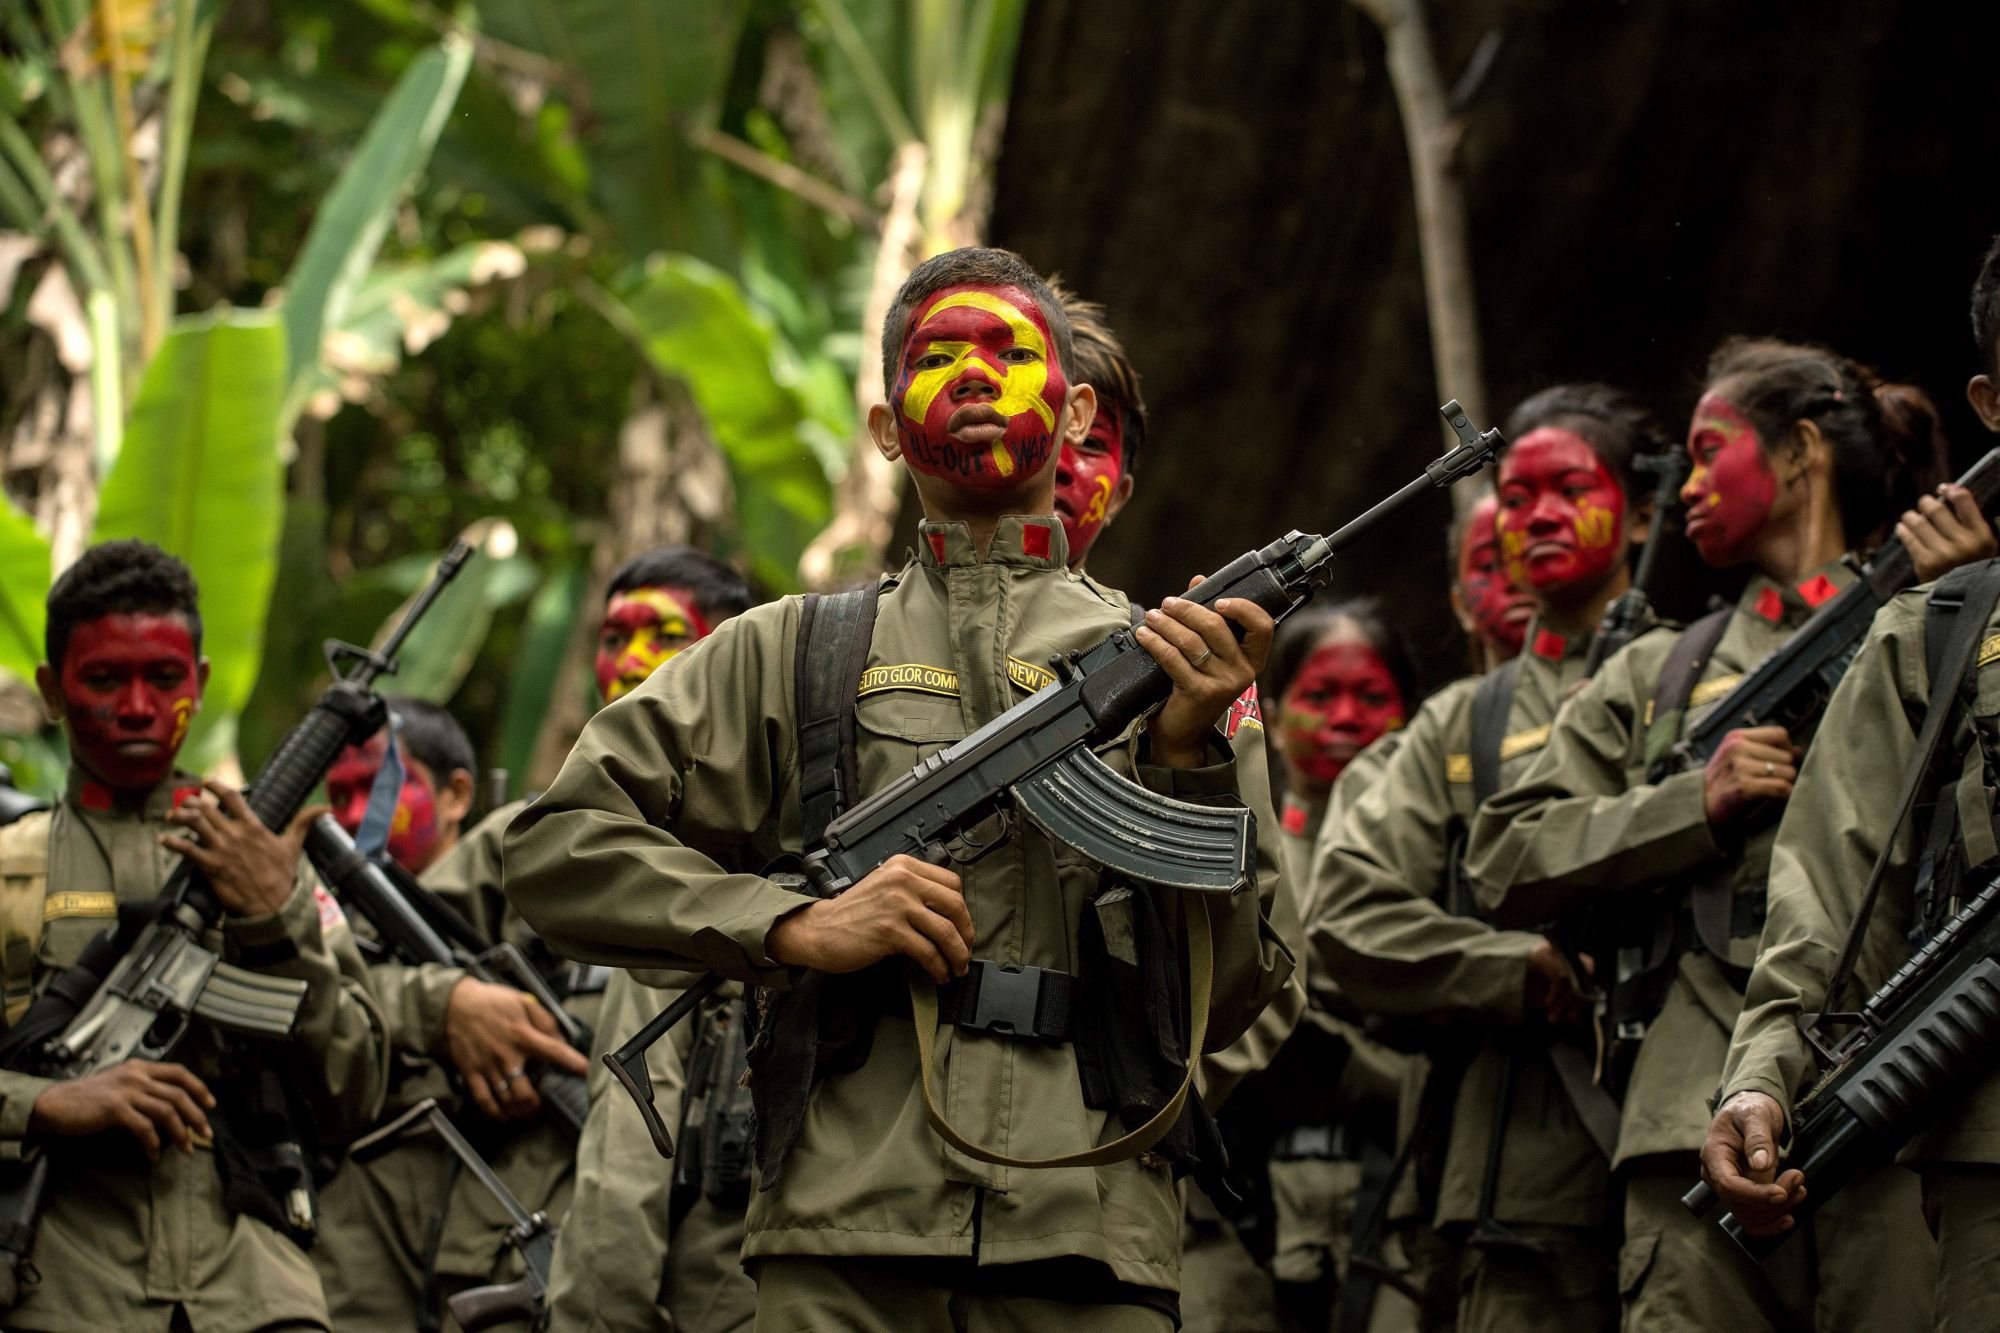 An Overview of Maoist Insurgency in India